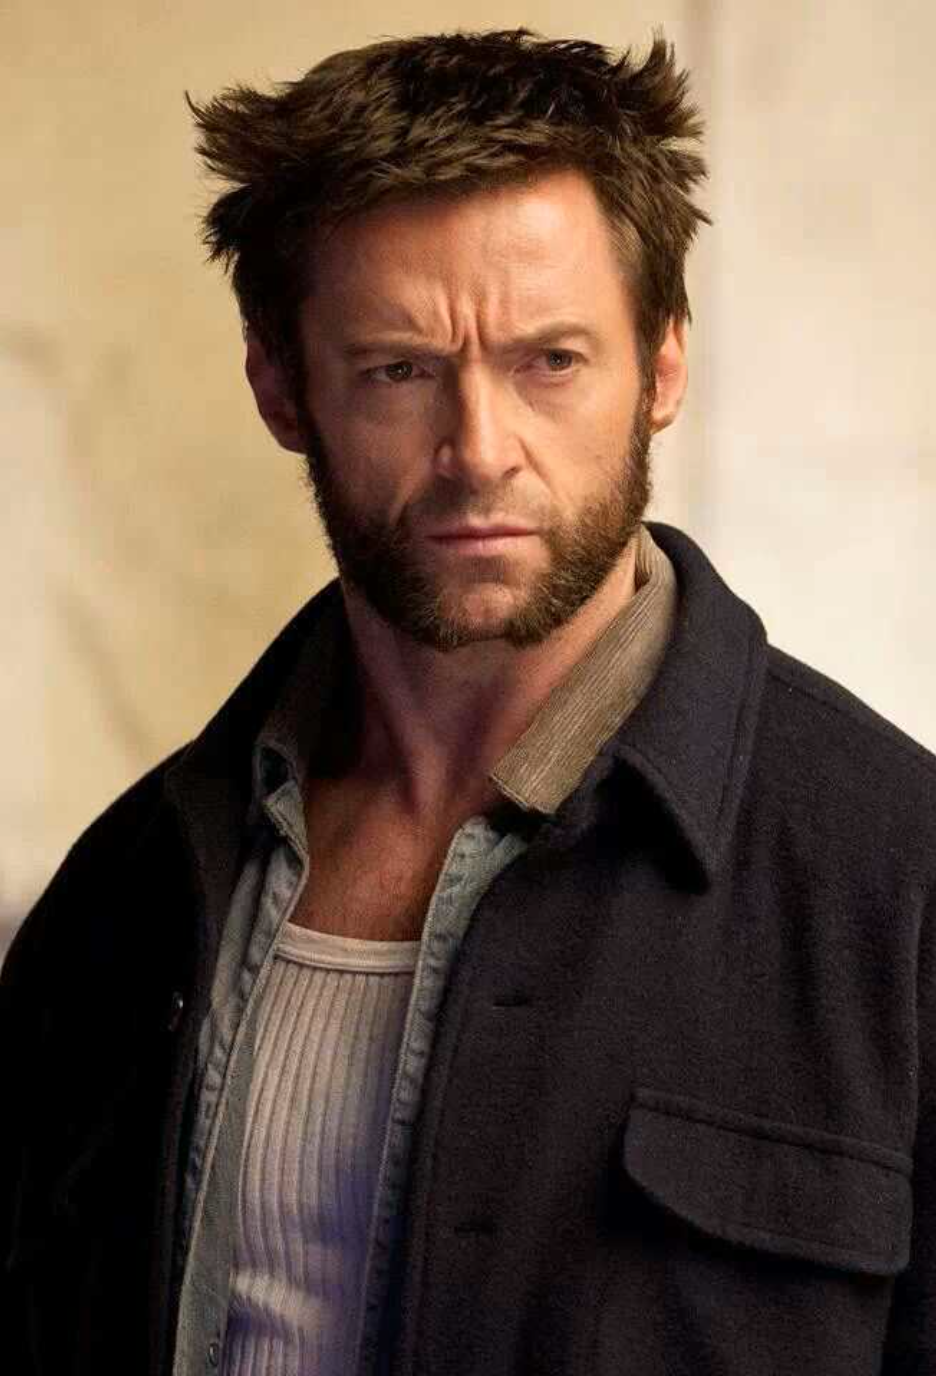 https://static.wikia.nocookie.net/heros/images/2/23/Wolverine_Cin%C3%A9ma_Infobox.png/revision/latest?cb=20200828100856&path-prefix=fr